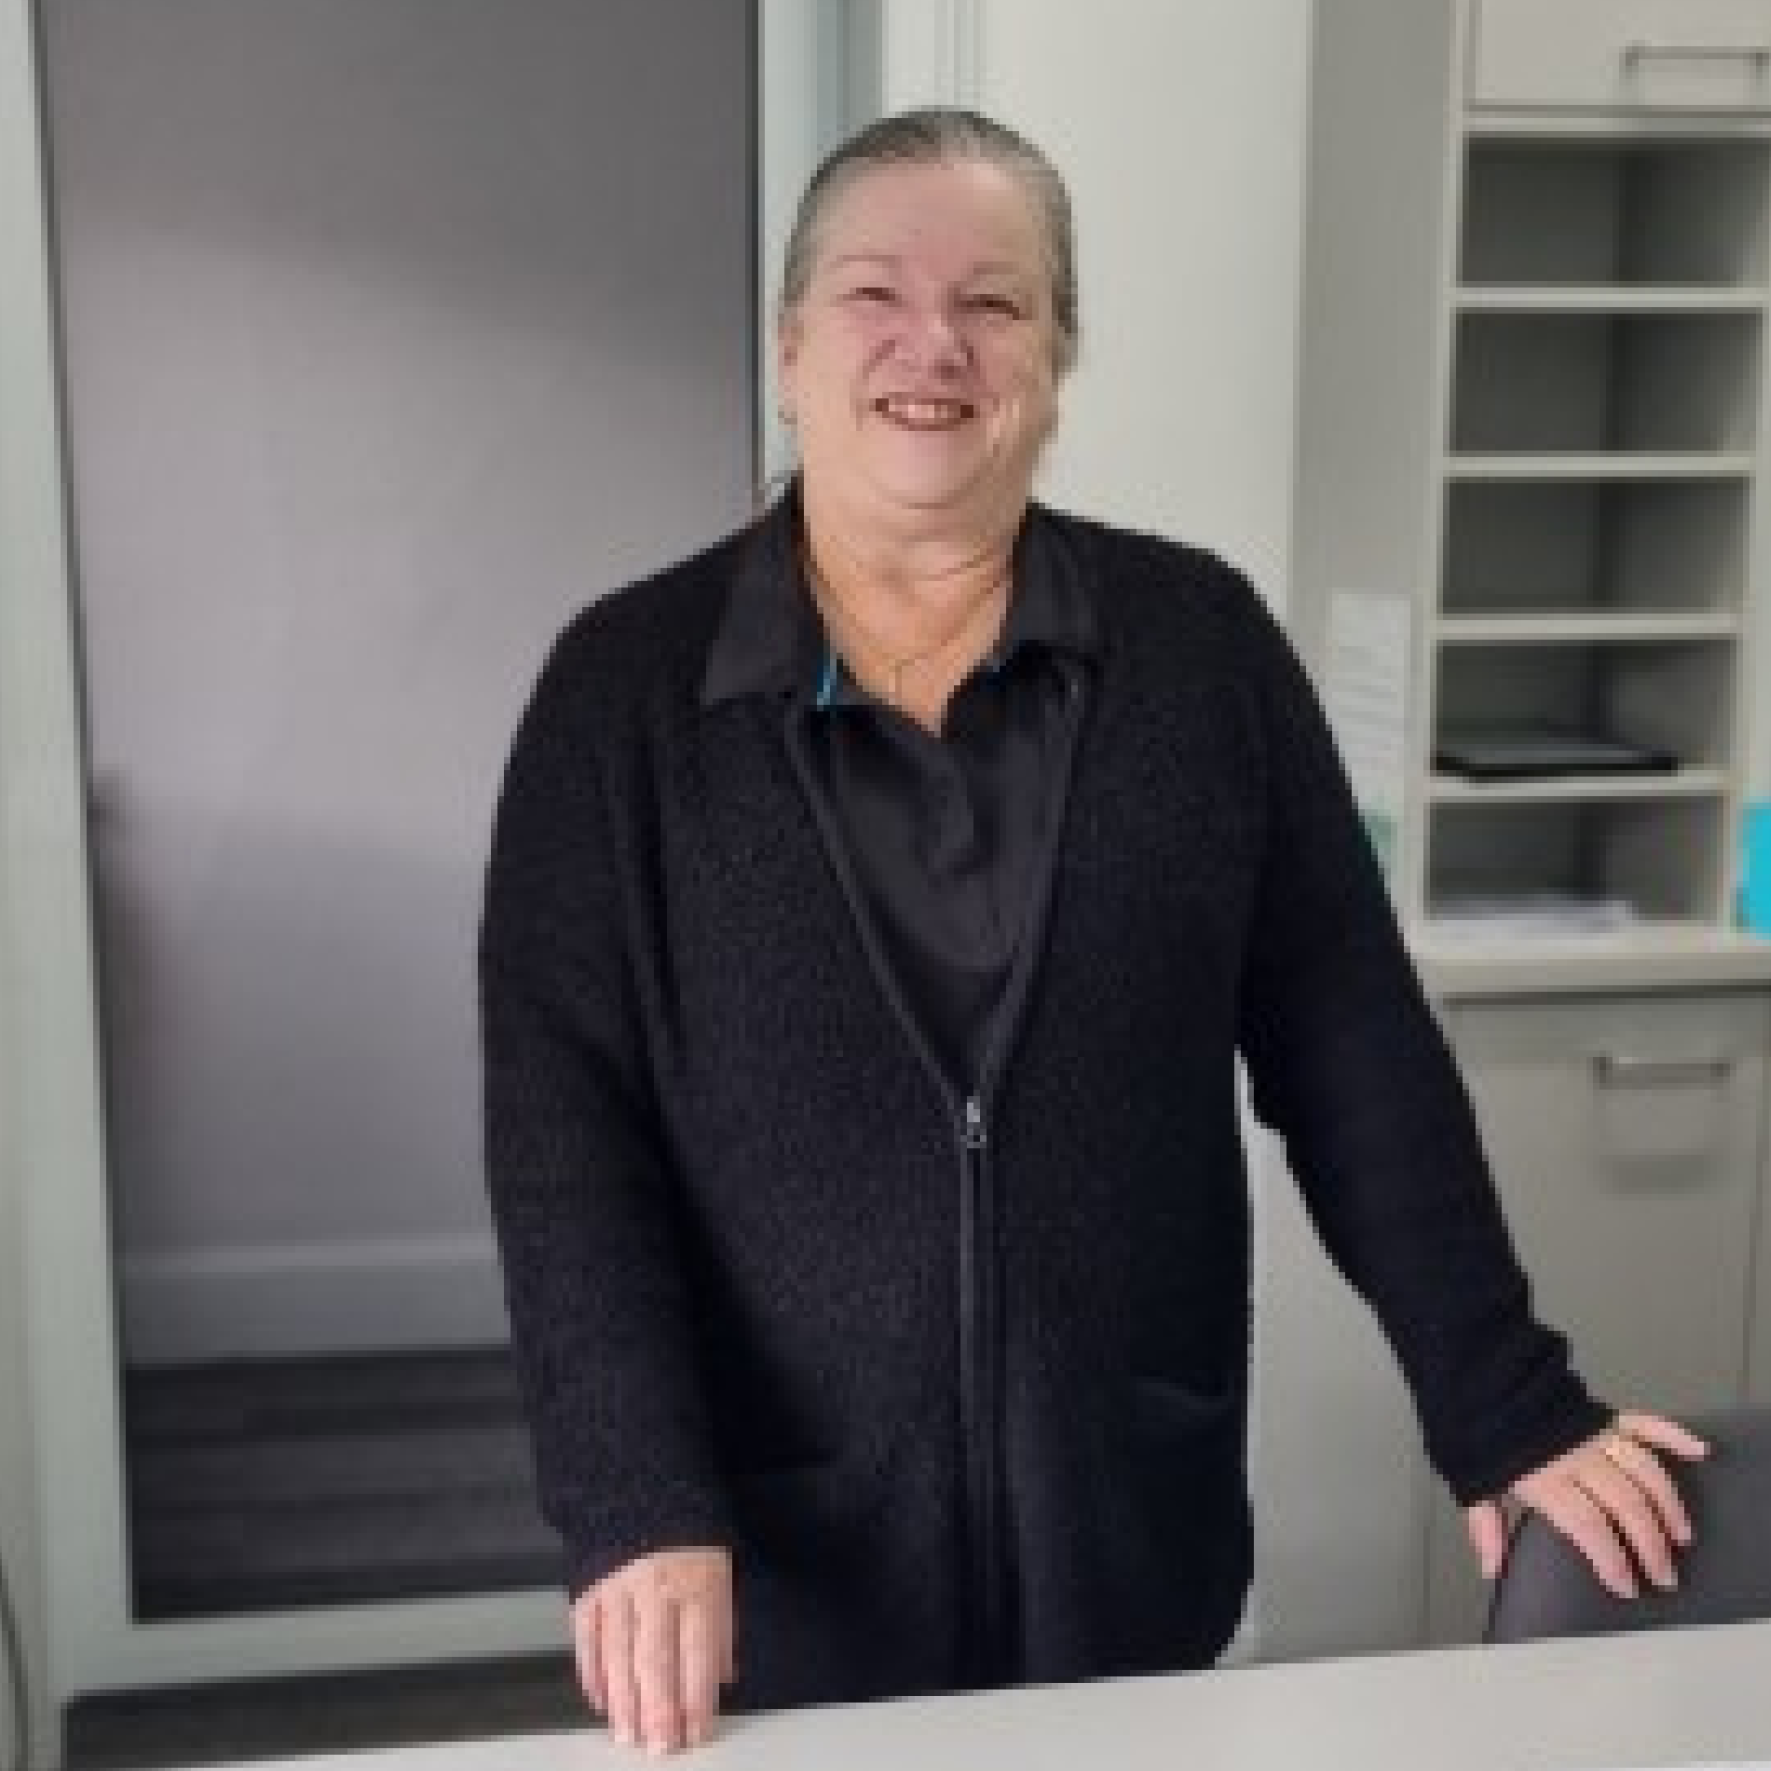 After 24 years Sandra is still helping many to find meaningful work